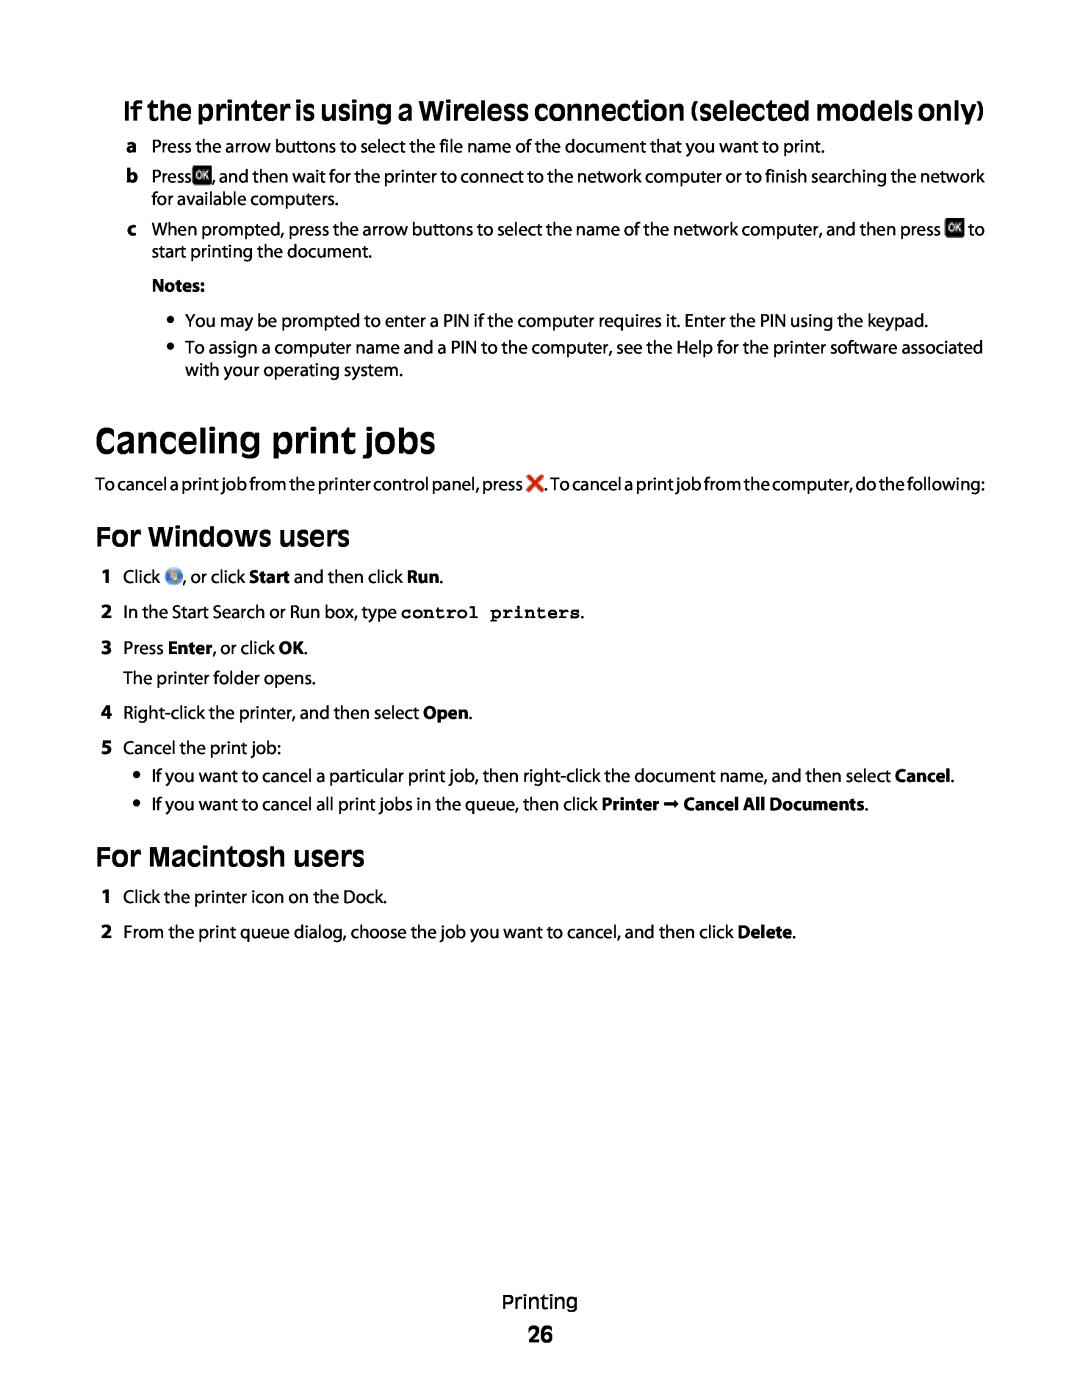 Lexmark S400 Canceling print jobs, If the printer is using a Wireless connection selected models only, For Windows users 